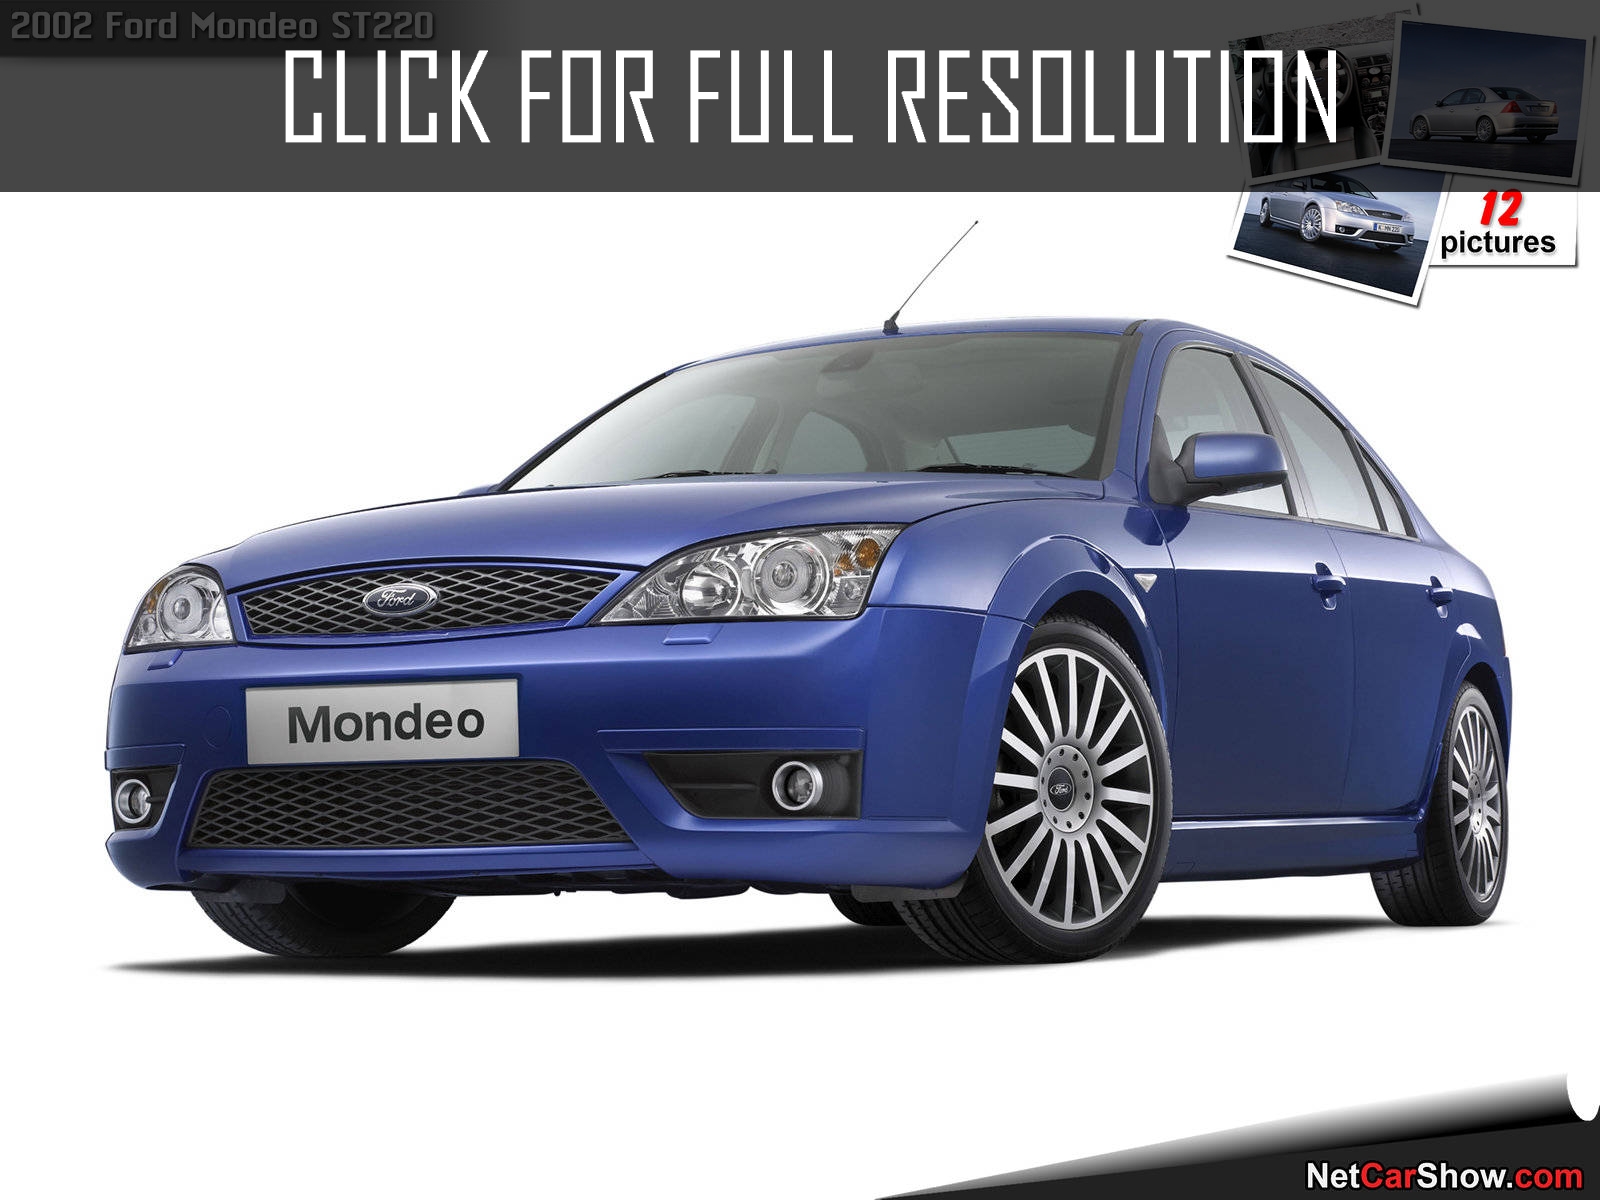 Ford Mondeo St